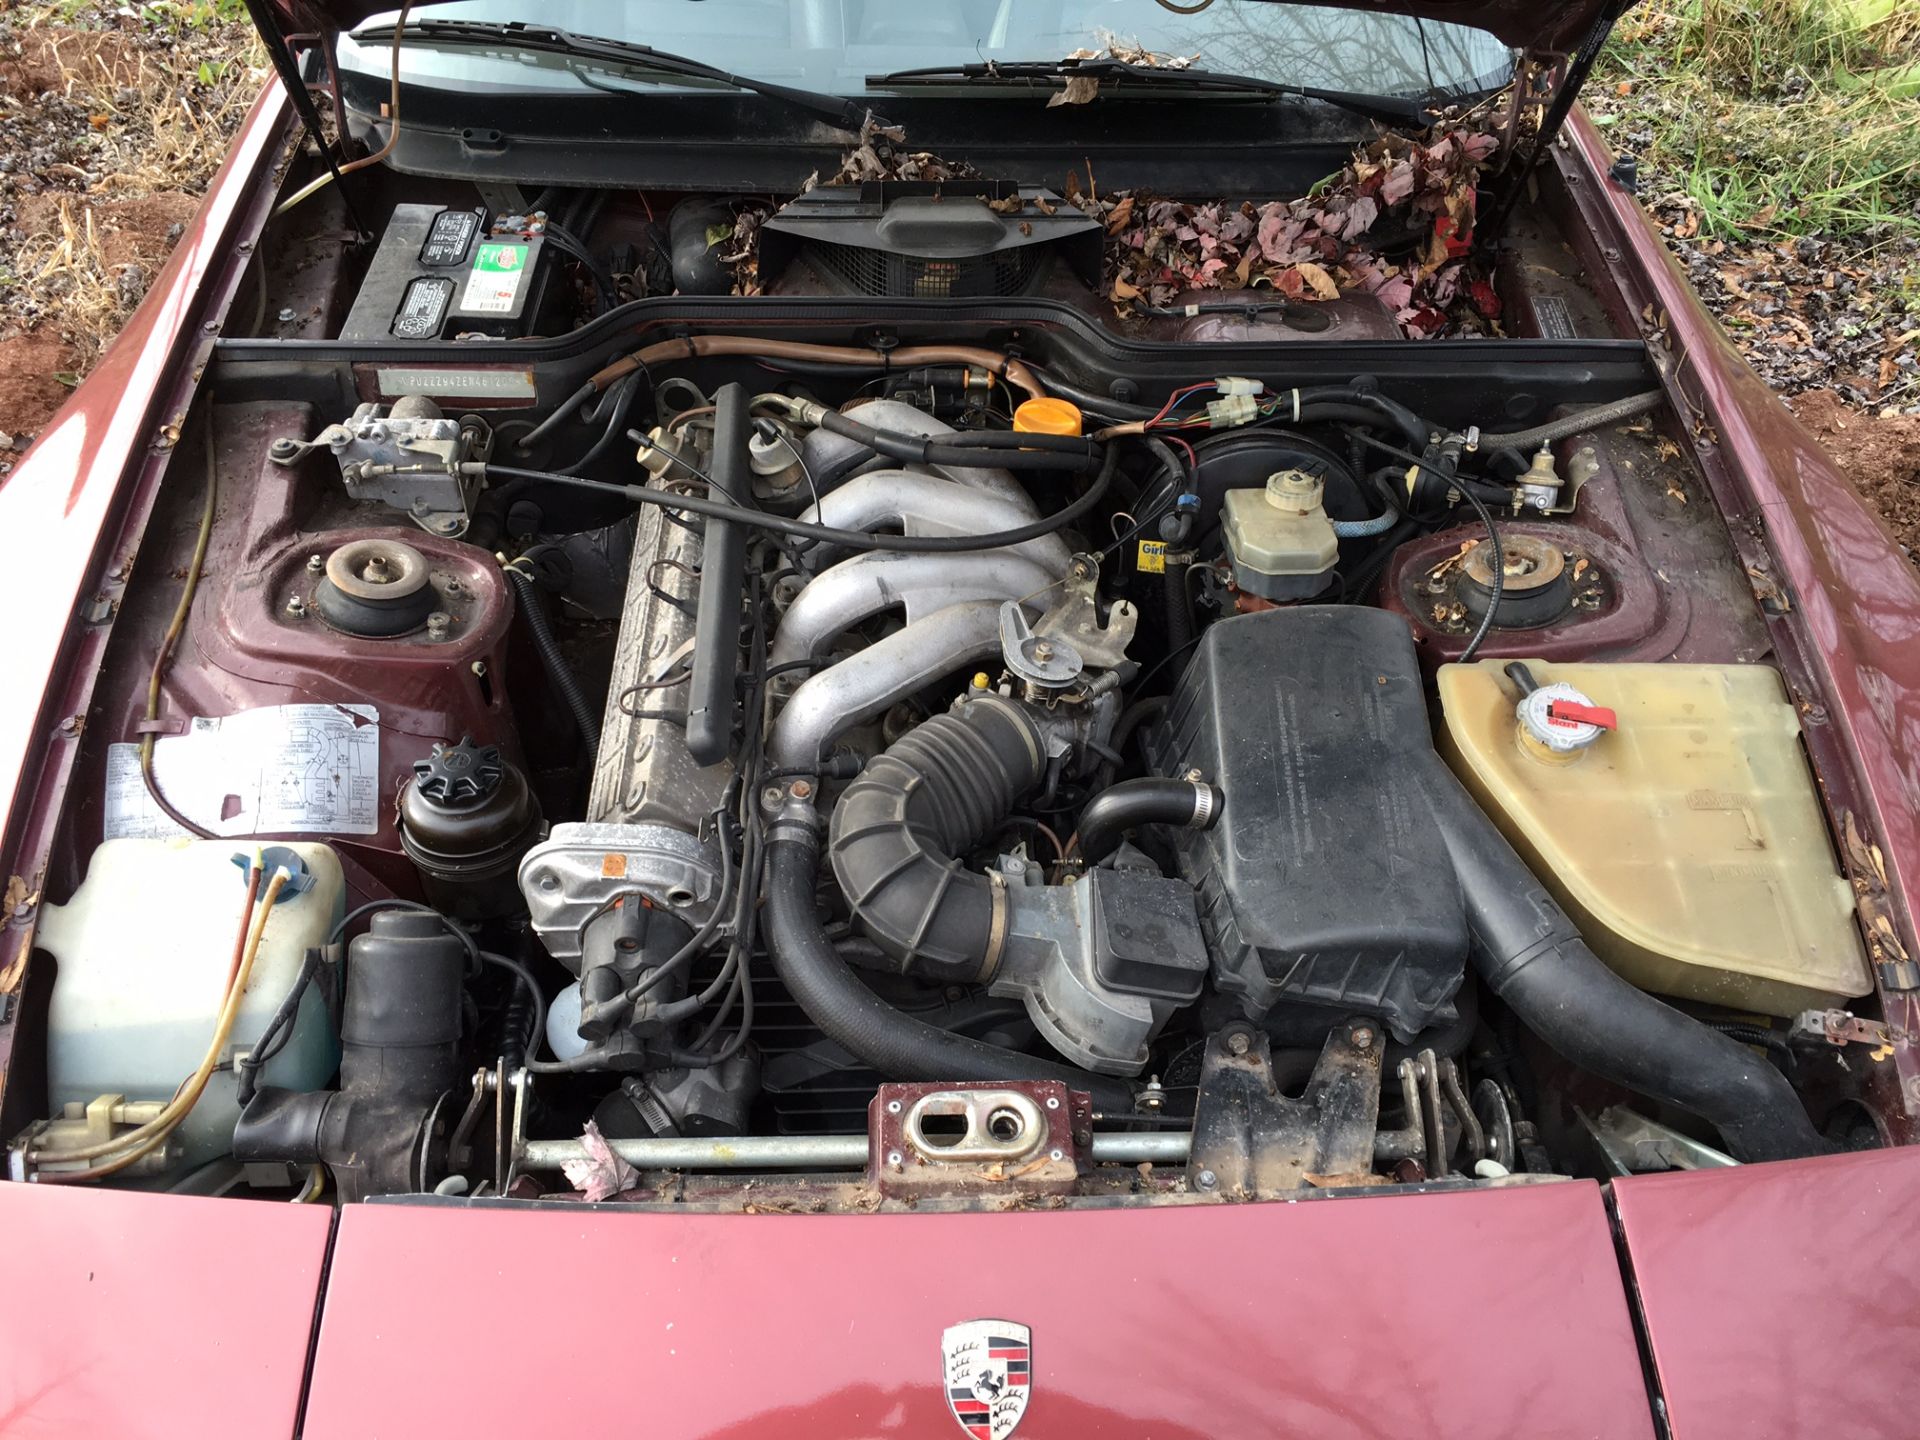 (1984) PORSCHE 944 VIN#: WP0AA0948EN461206; 5 SPEED MANUAL TRANSMISSION, RUNNING CONDITION - Image 12 of 12